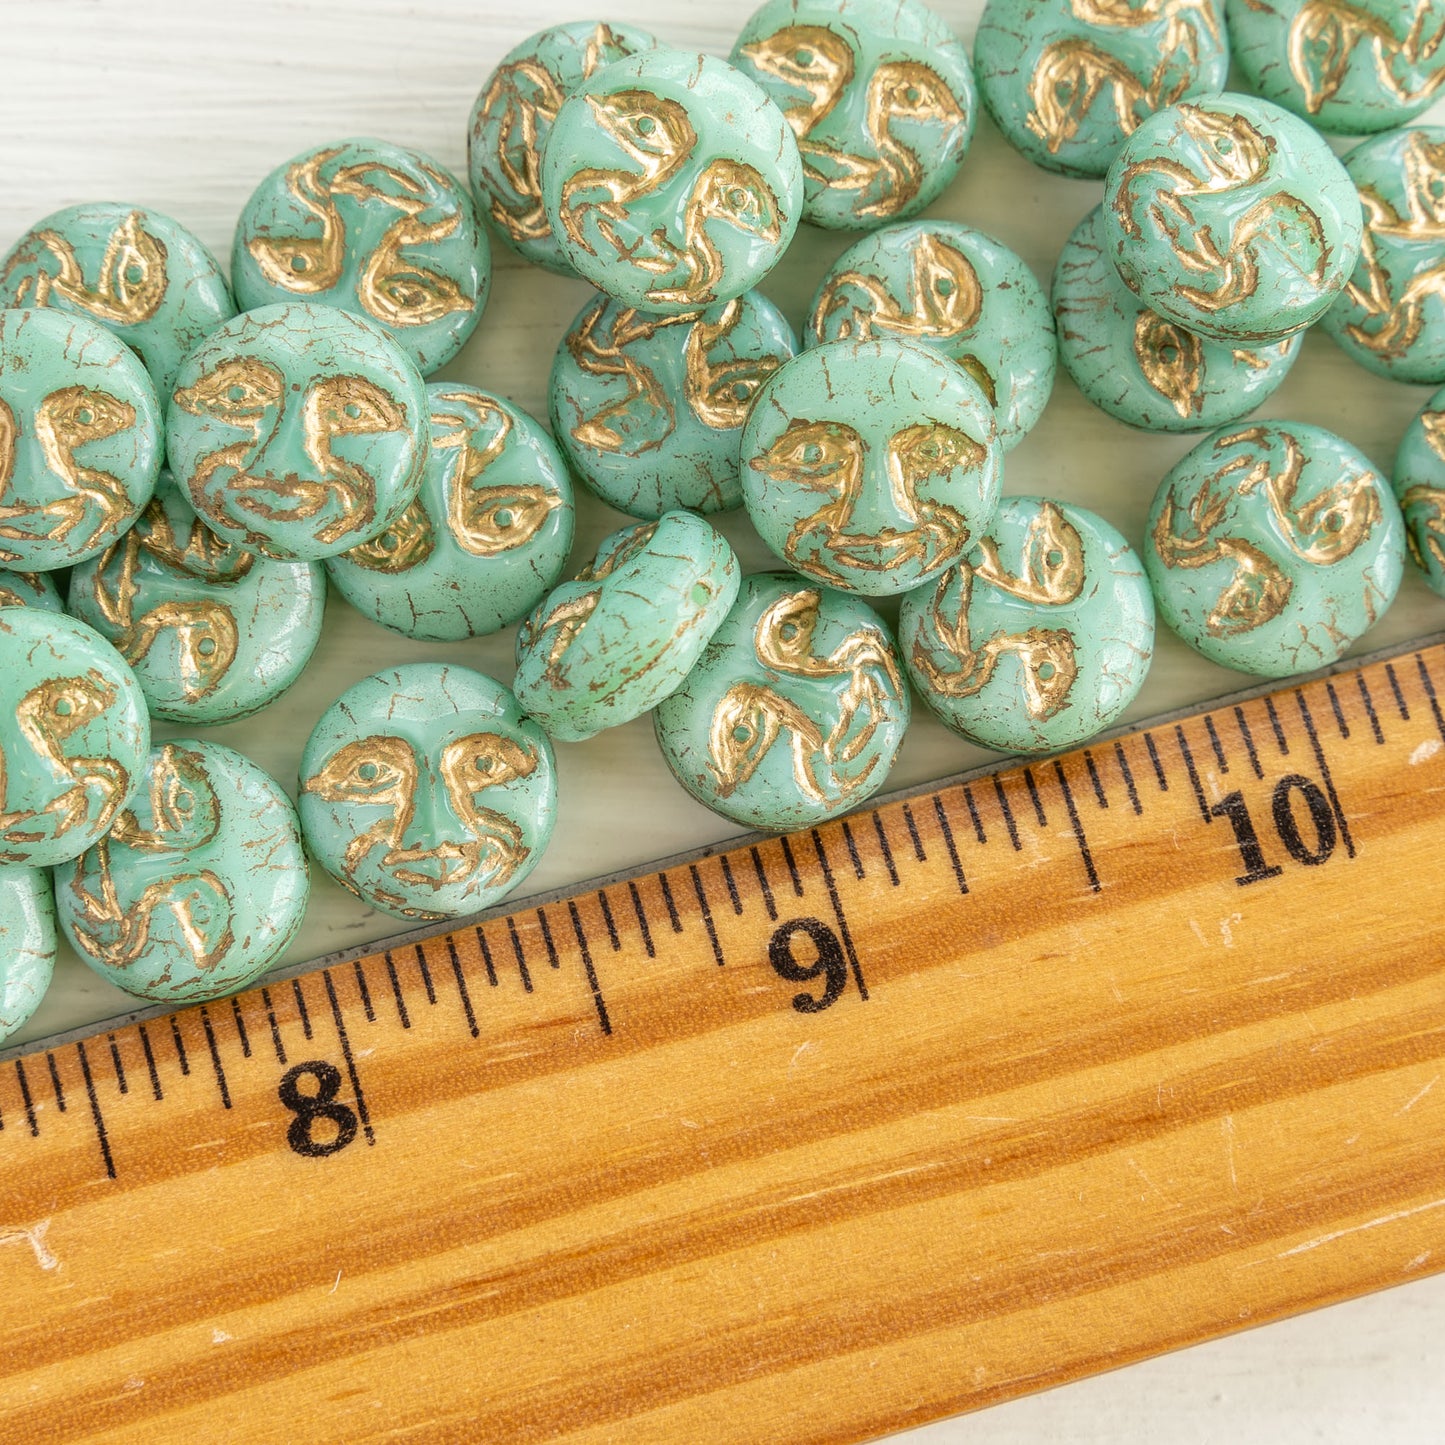 Load image into Gallery viewer, 13mm Moon Face Beads - Turquoise - 15 Beads
